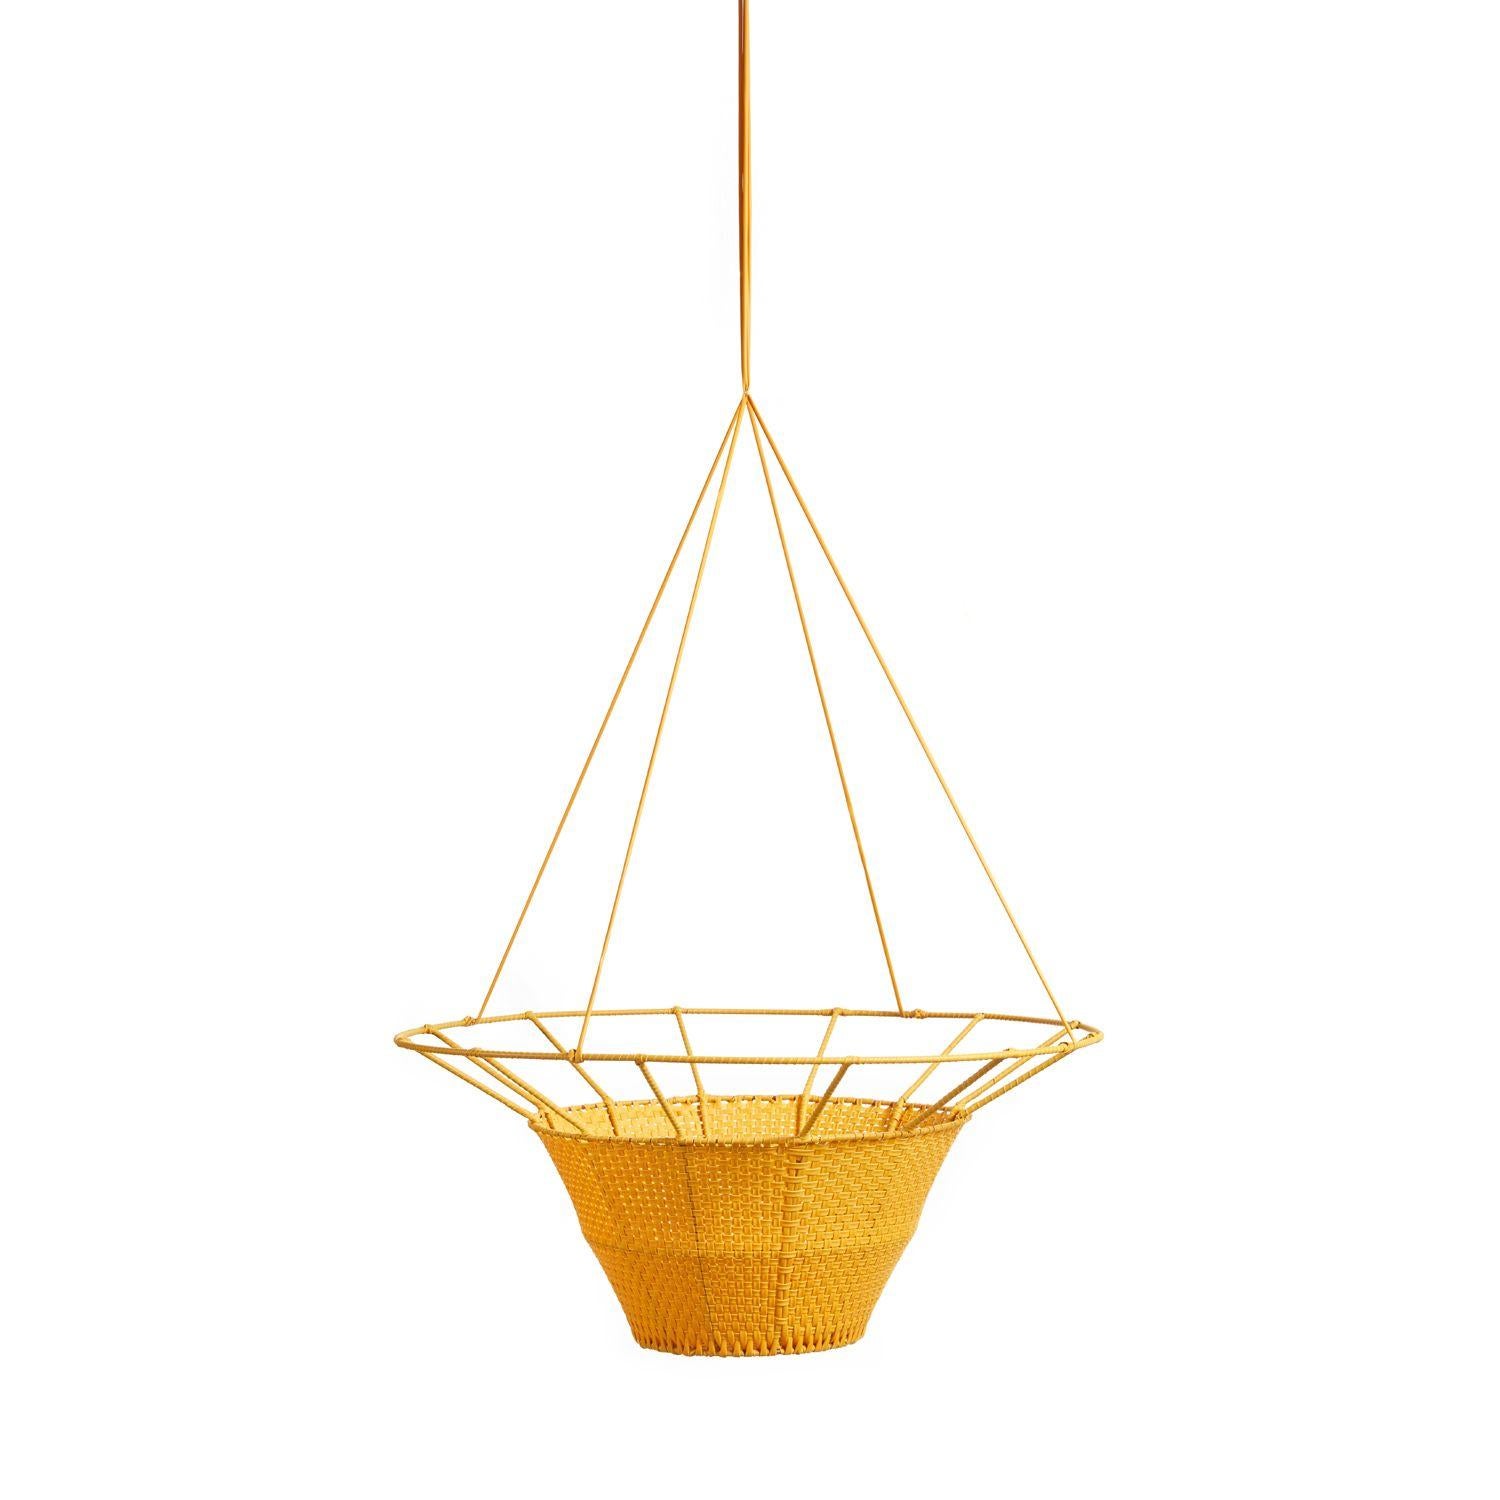 Other Large Dichas Hanging Planter by Cristina Celestino